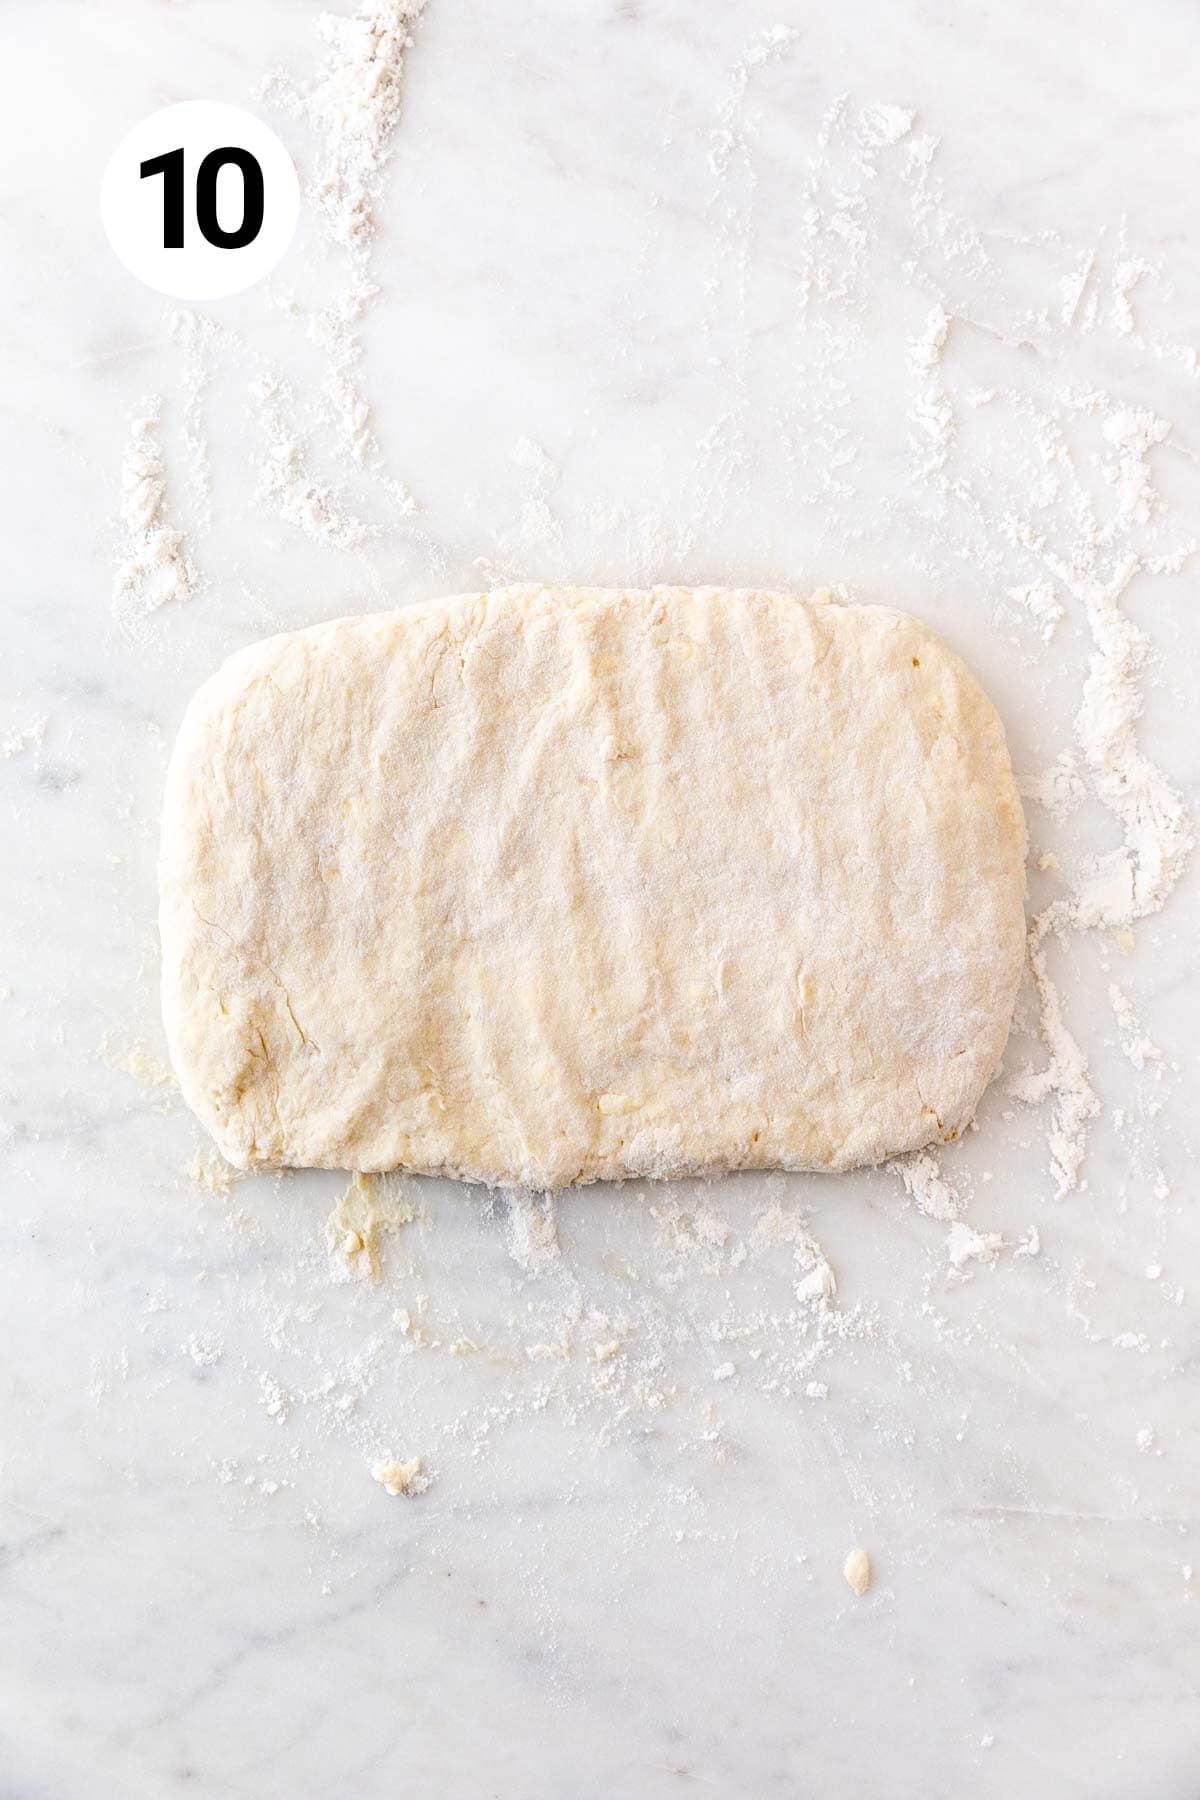 A rectangle of dough on a floured marble surface.